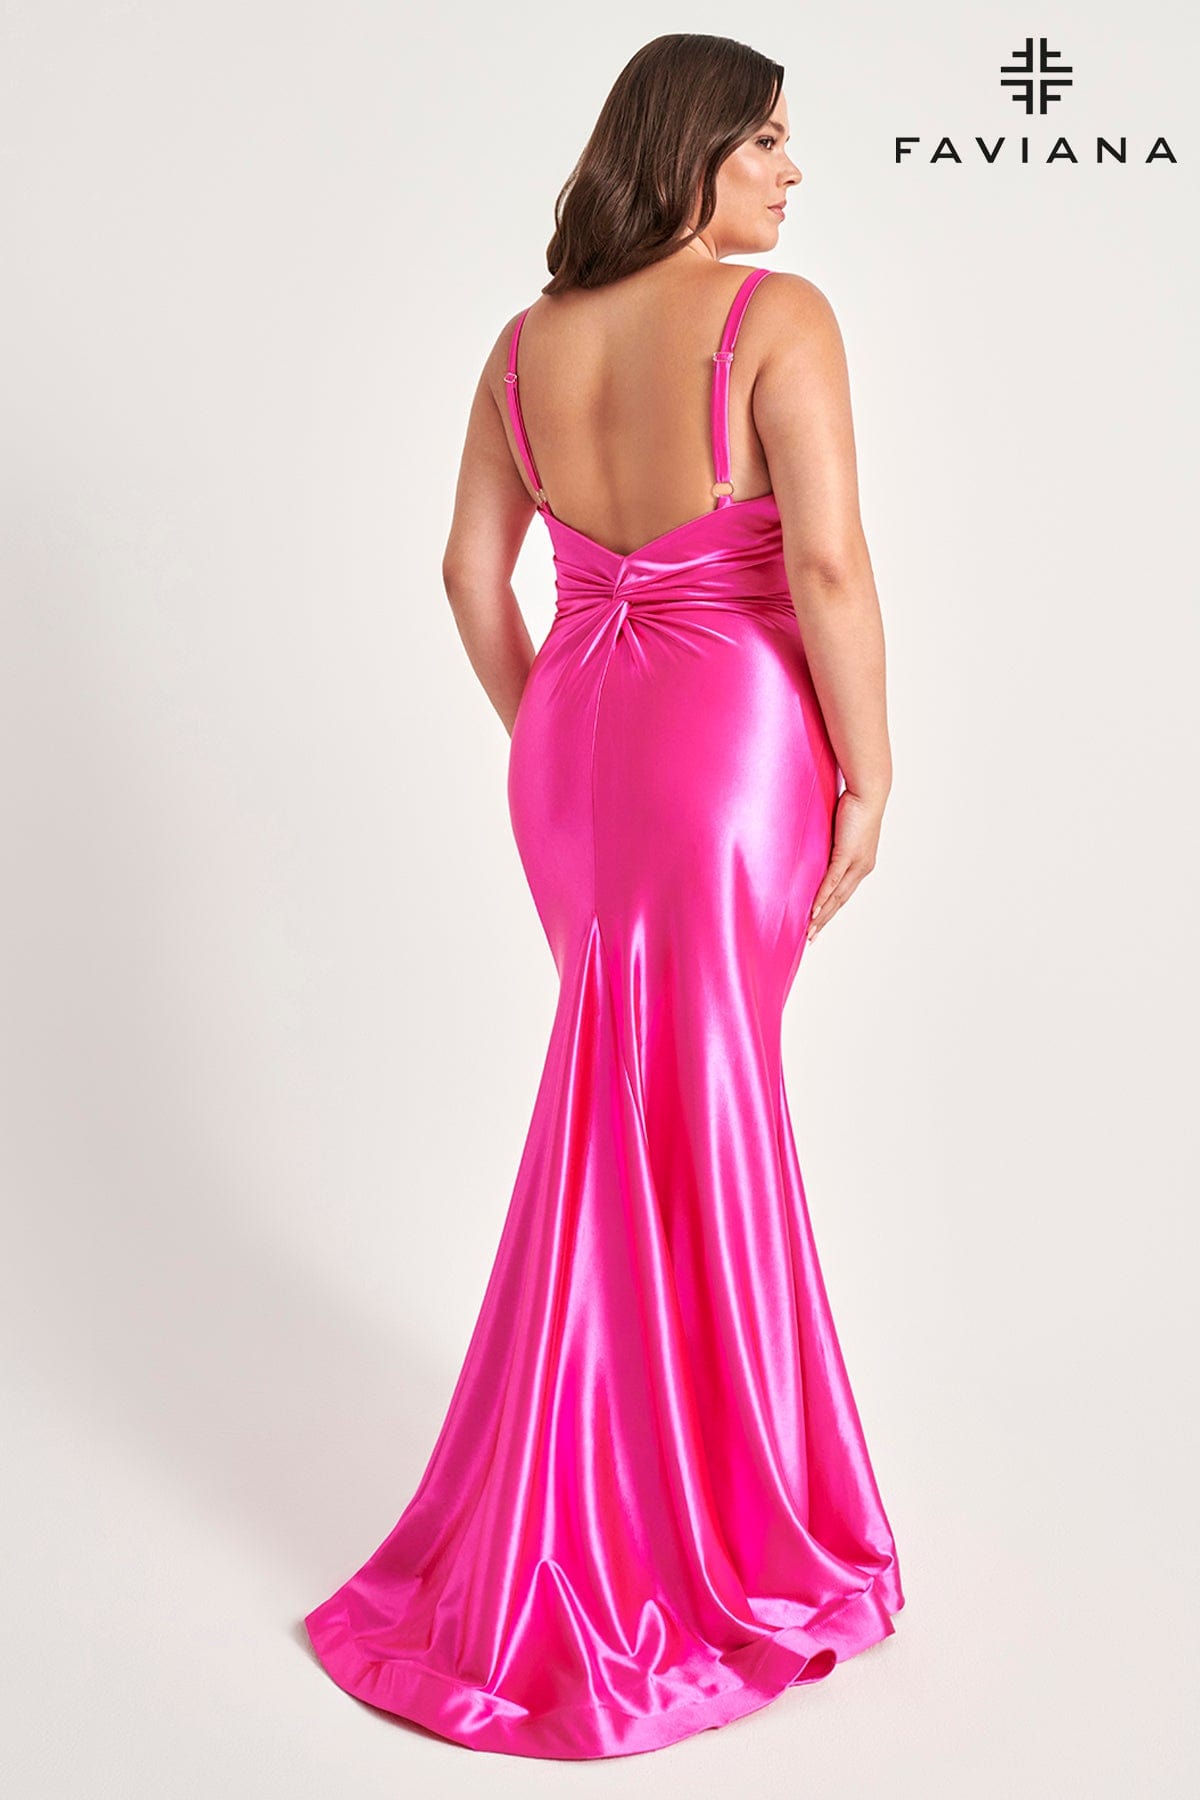 Stretch Satin Hot Pink Plus Size Prom Dress With Knot Detailing